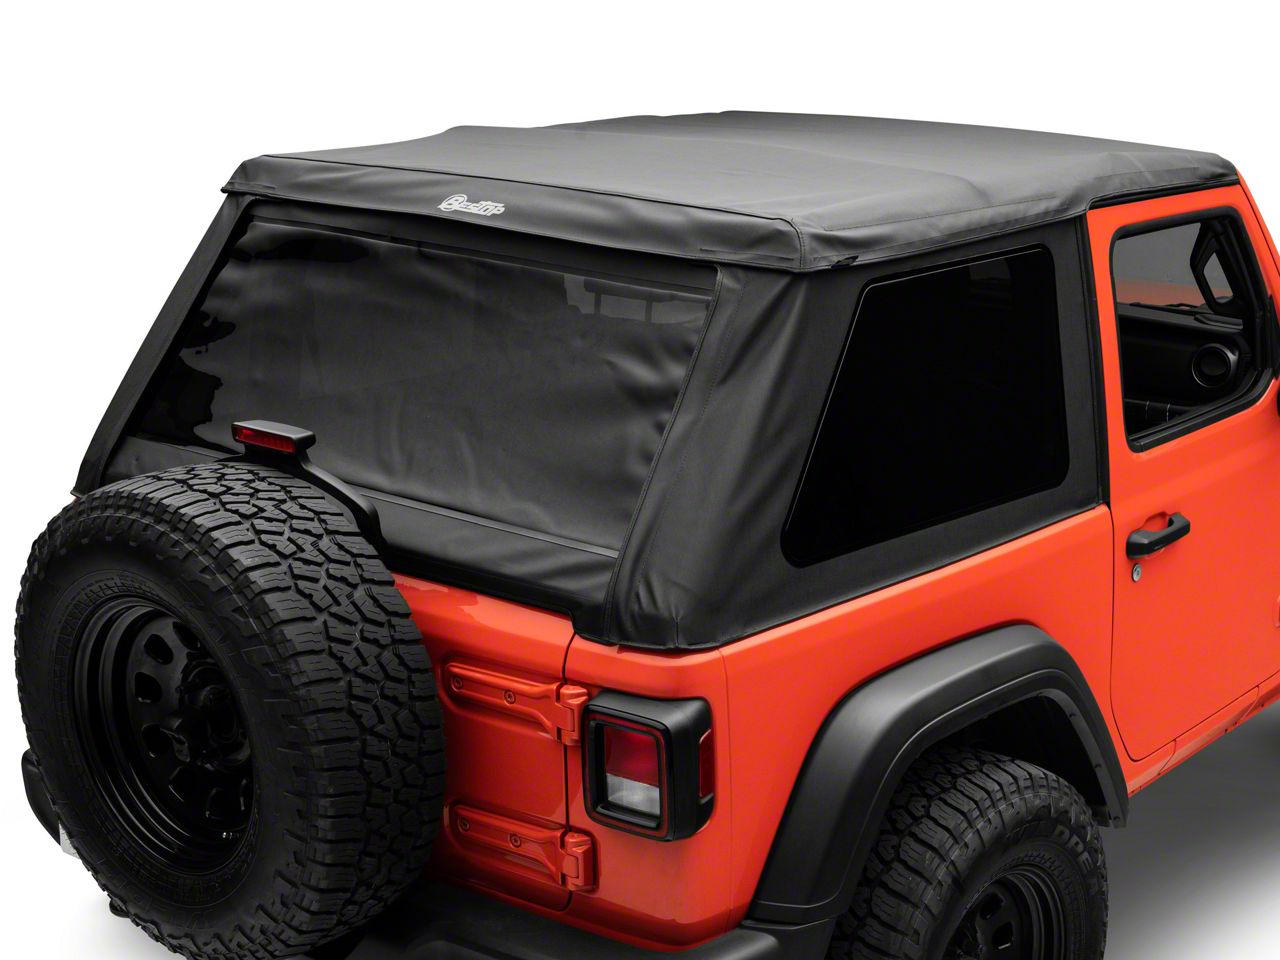  MasterTop Complete Soft Top with Hardware - Fits Jeep Wrangler  JL 4-Door 2018-2023 - Jeep Wrangler JLU Soft Top 4 Door Jeep Wrangler Soft  Top - Jeep JL Soft Top 4 Door, Black Diamond : Automotive